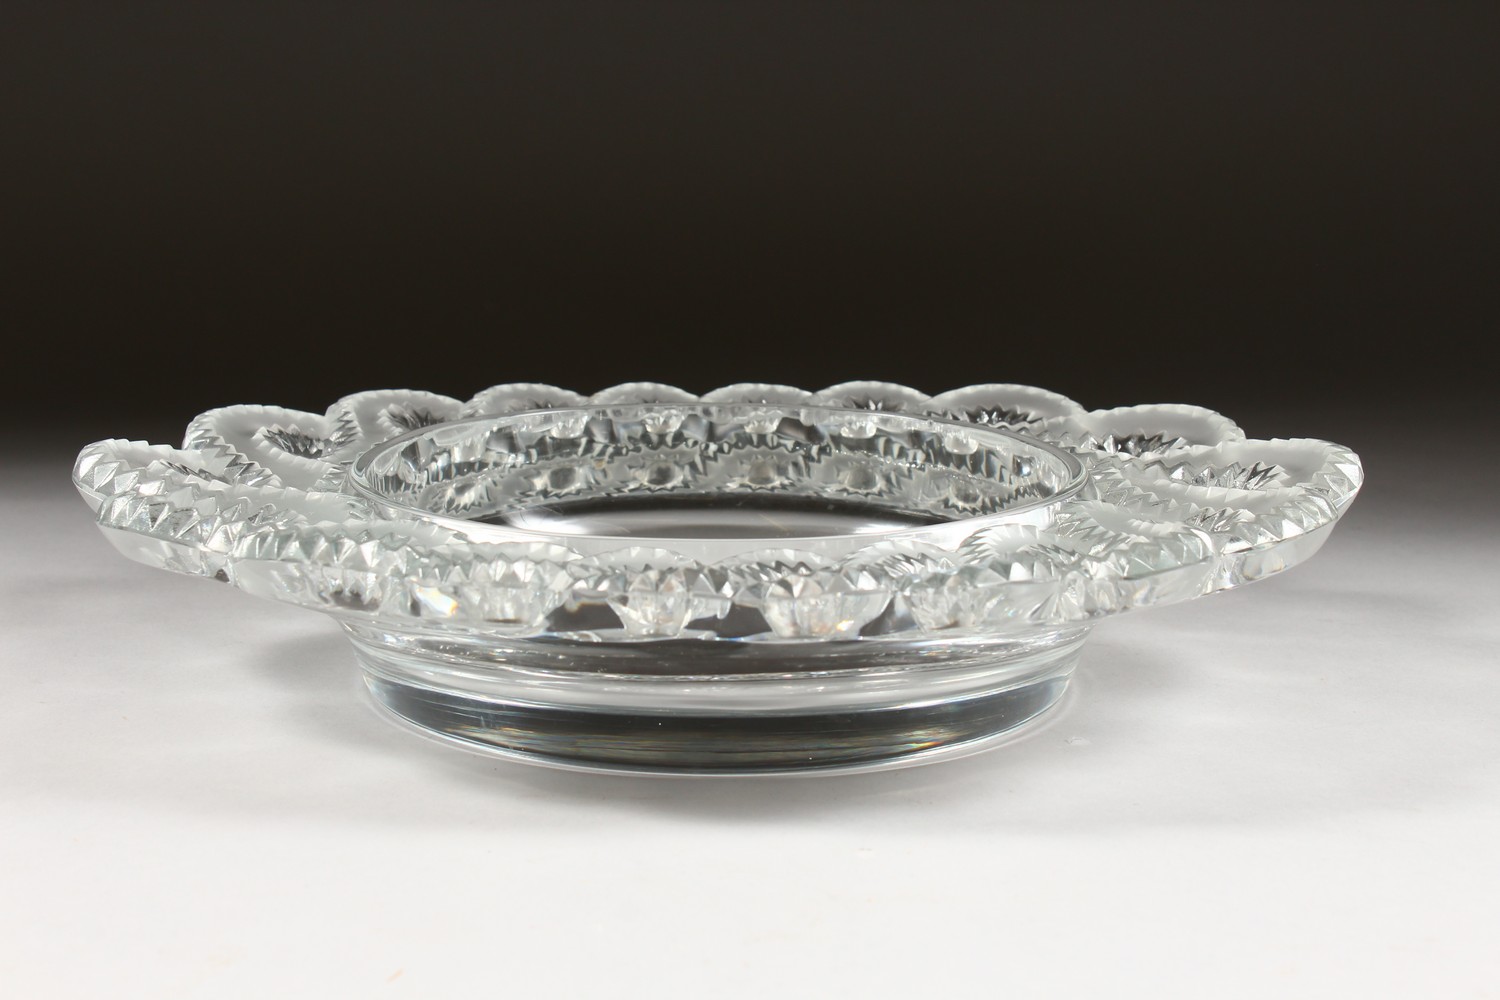 A HEAVY CIRCULAR LALIQUE DISH, with scalloped sides. Etched LALIQUE, FRANCE. 11ins diameter. - Image 7 of 8